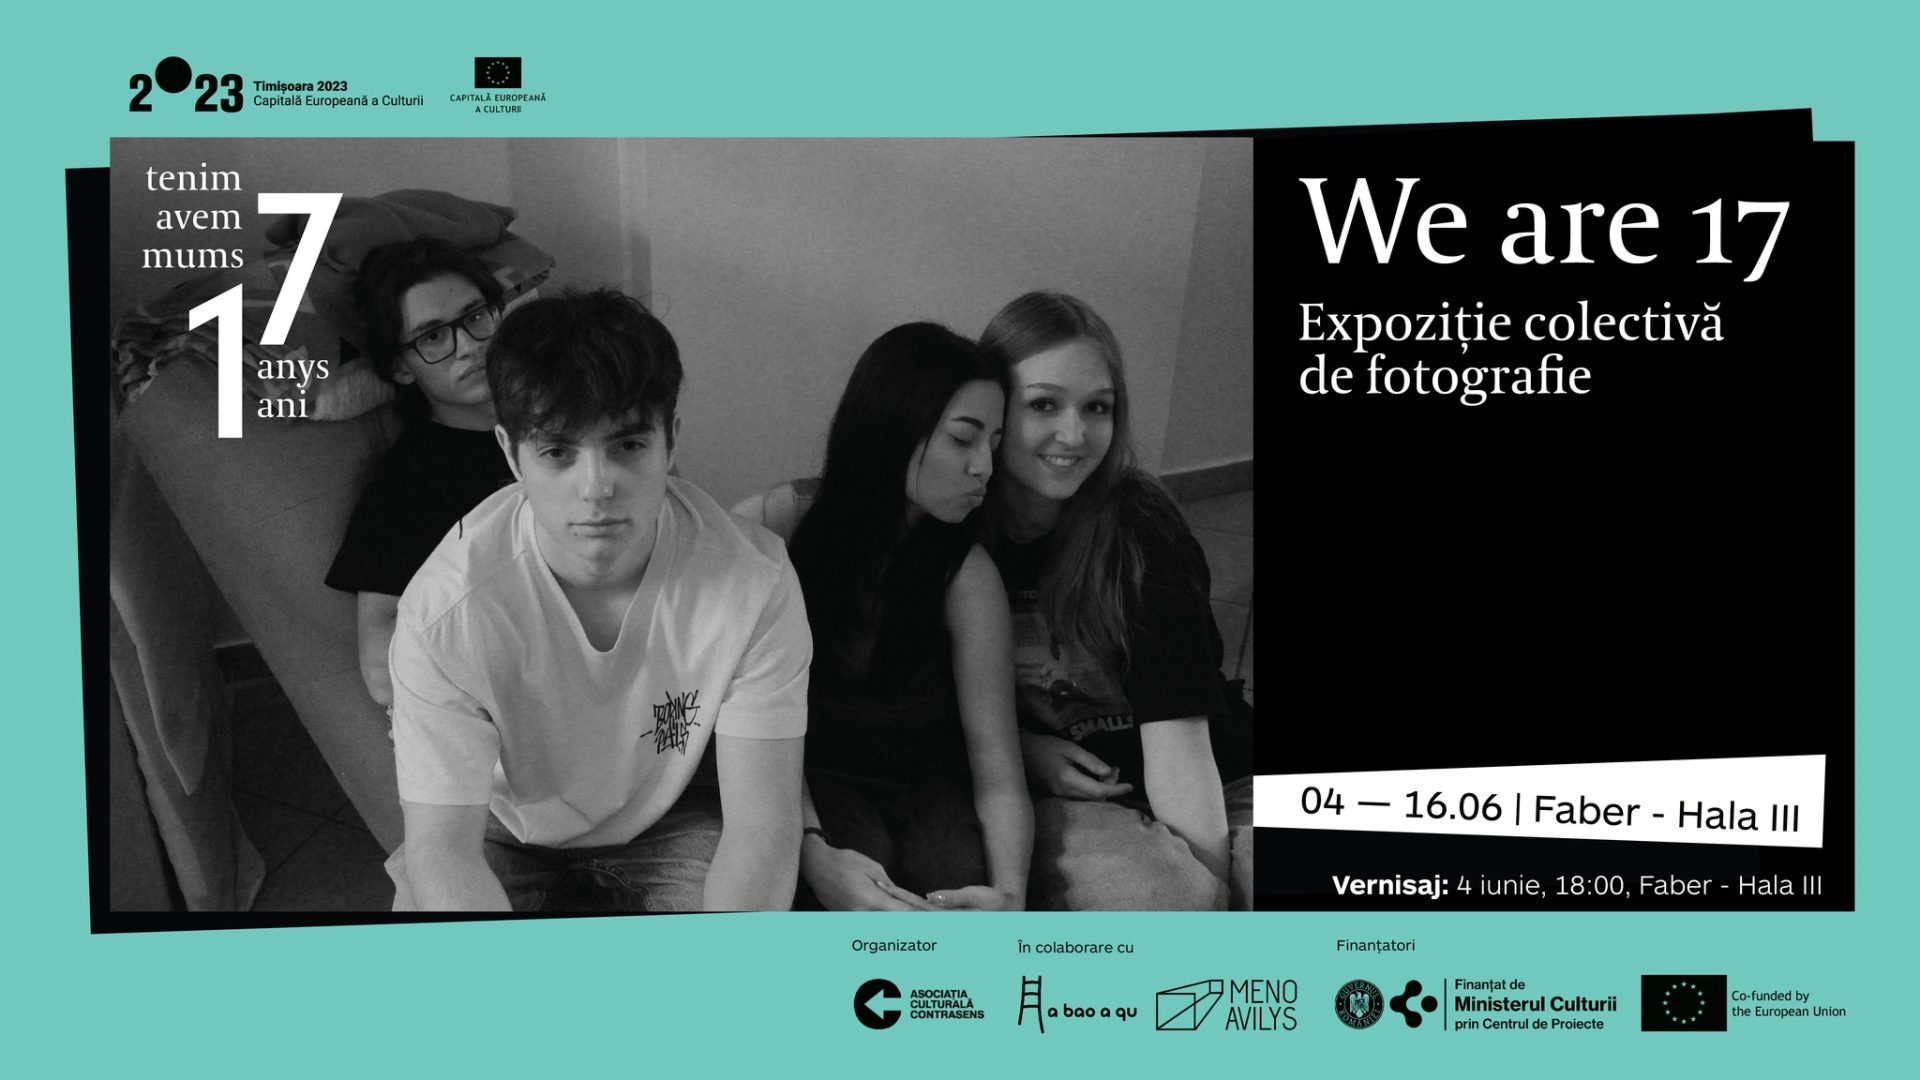 We are 17 - Collective photo exhibition